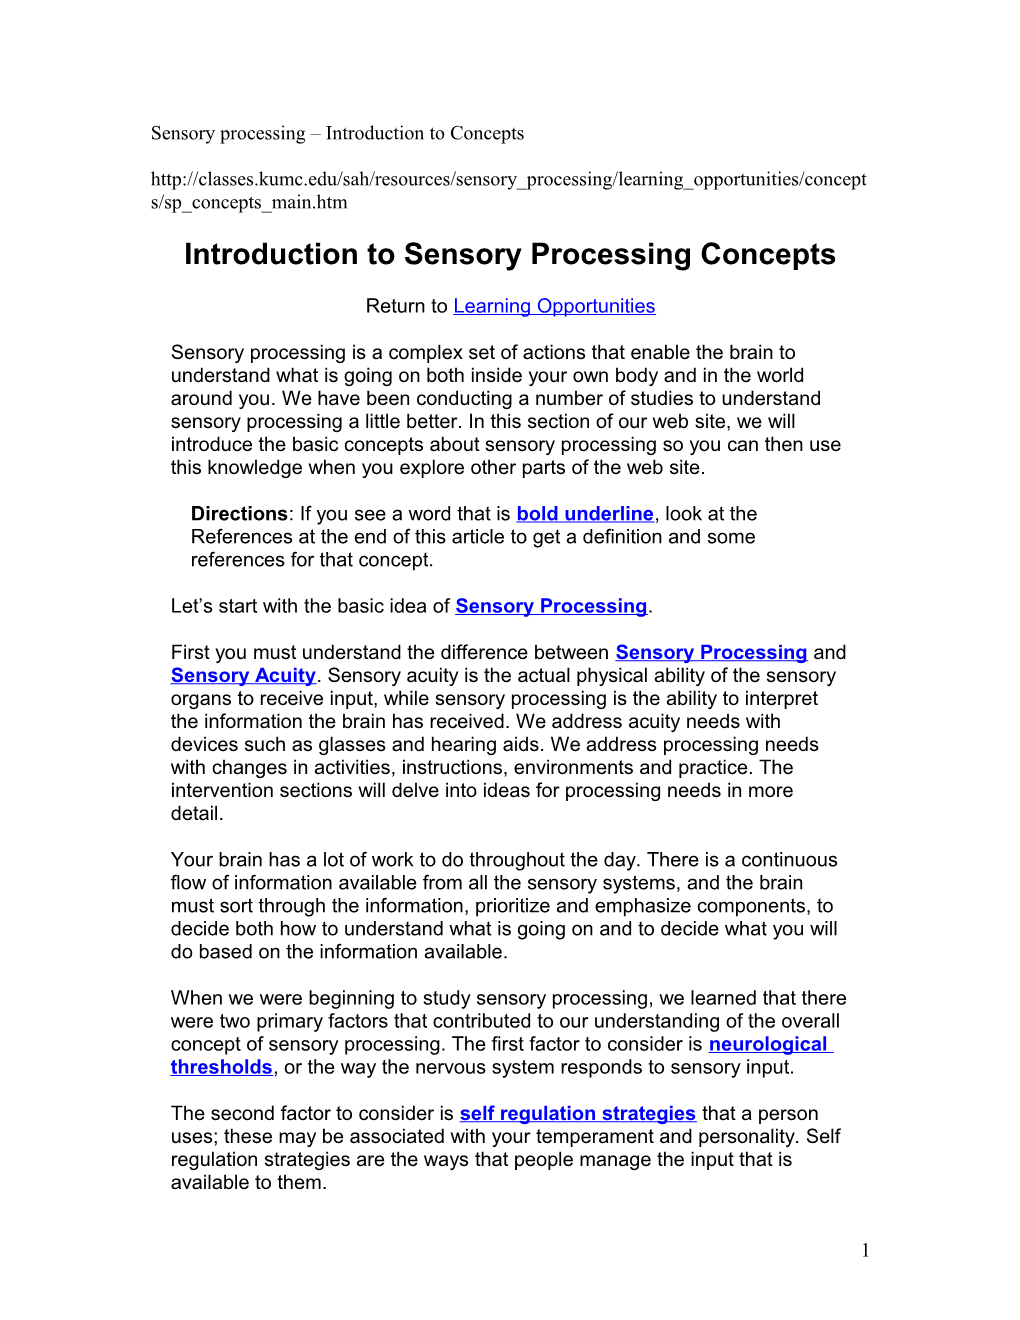 Sensory Processing – Introduction To Concepts